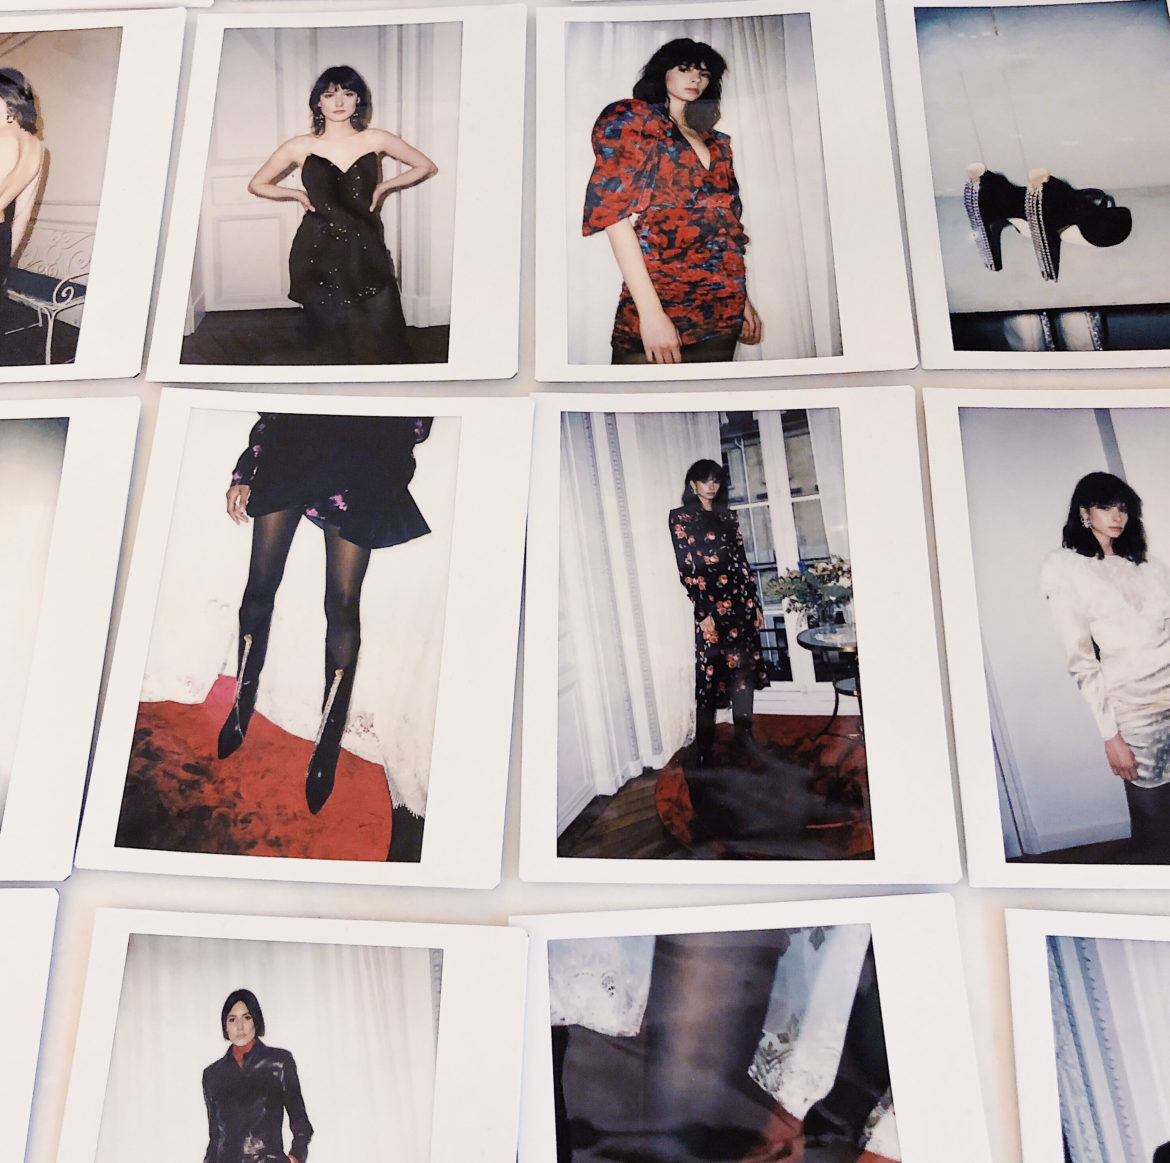 Paris Fashion Week Crush: The Polish Brand Magda Butrym. Review of Magda Butrym Presentation of the Ready To Wear Fall Winter 2019 2020 Collection. Polaroids taken during the presentation.